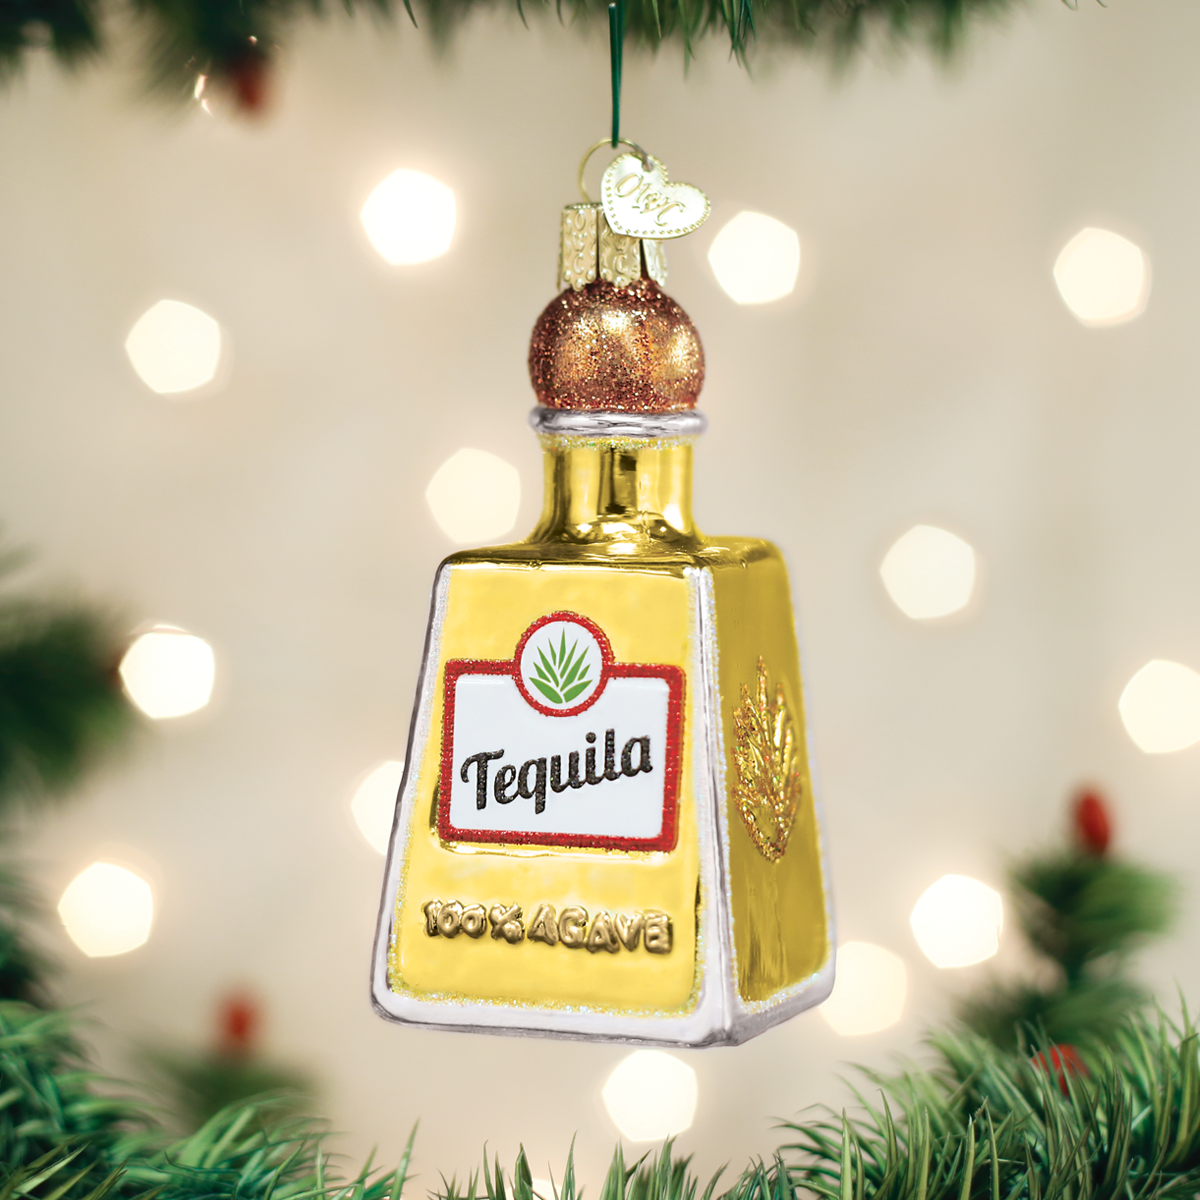 Old World Christmas - Tequila Bottle Ornament    